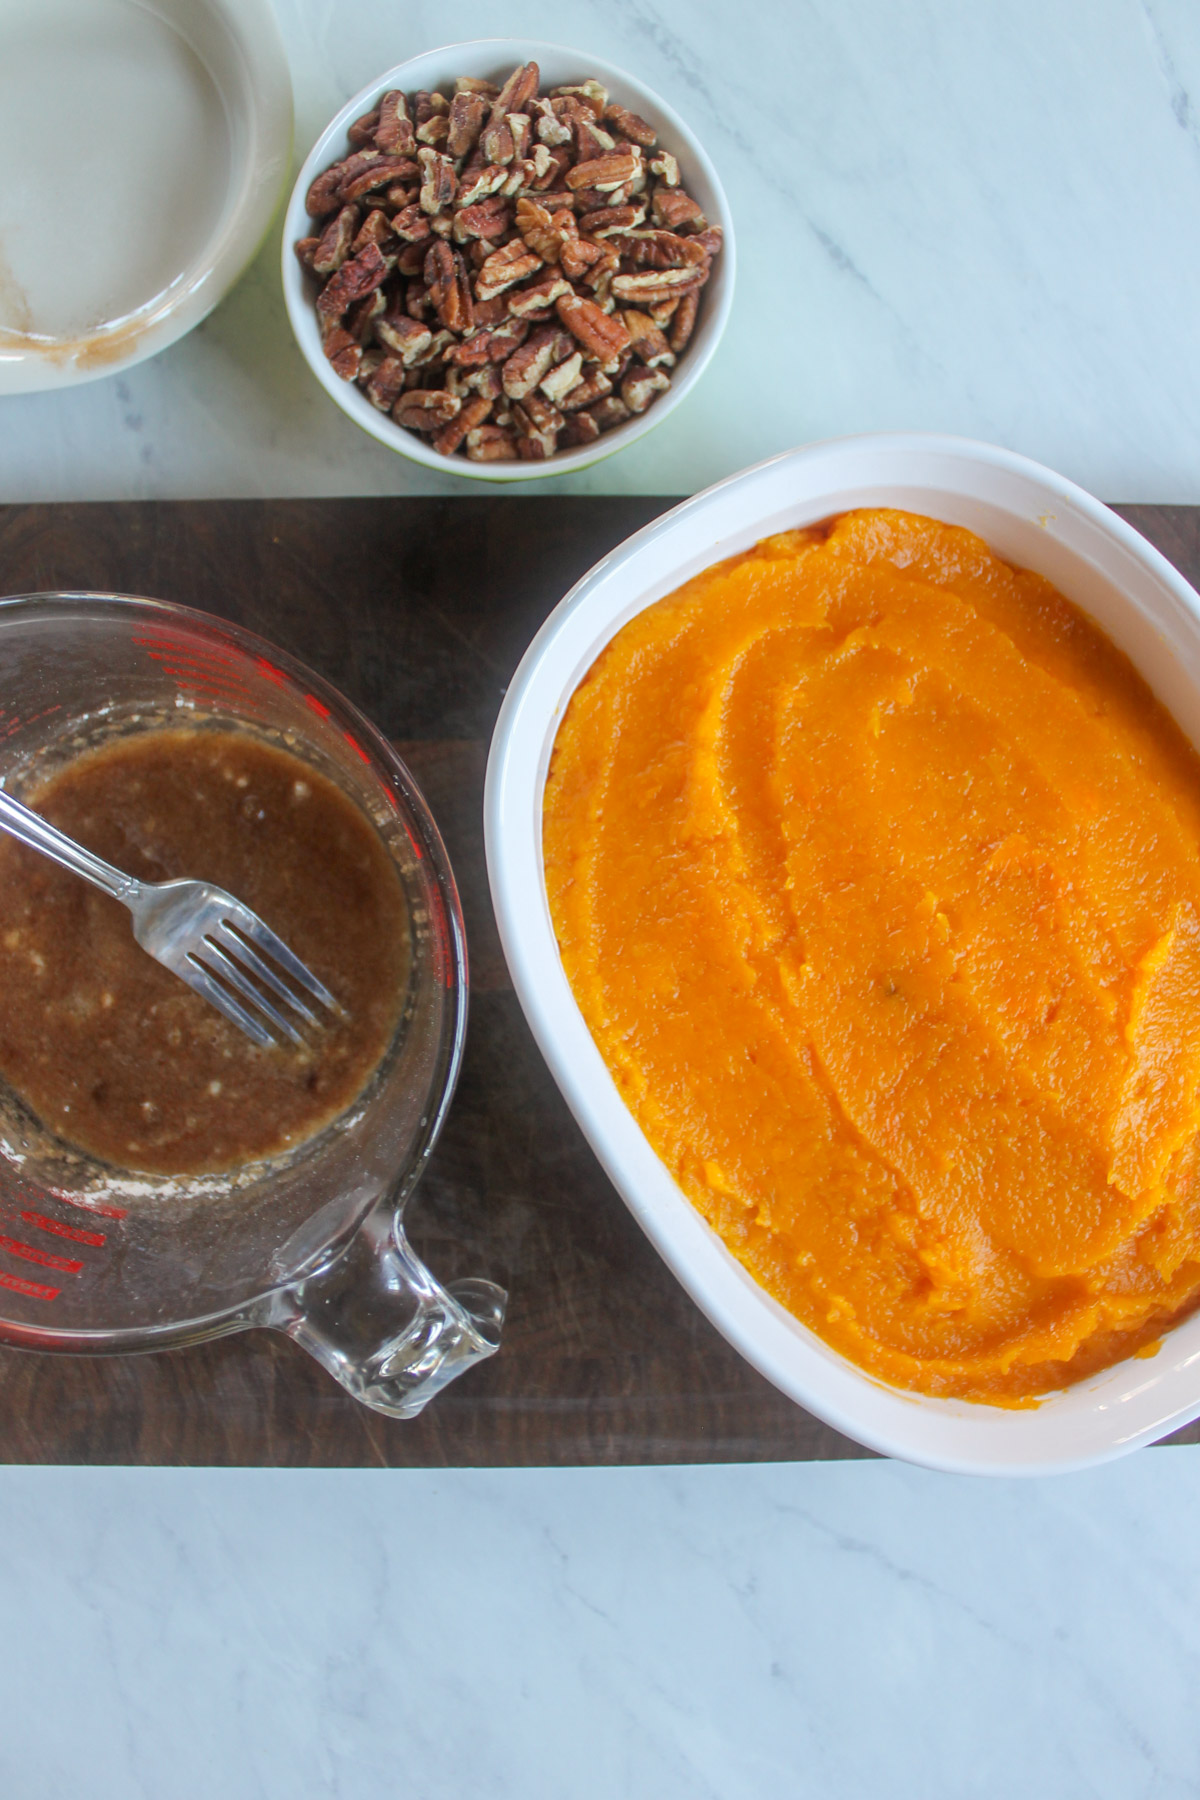 Mashed butternut squash smoothed into a casserole dish with ingredients for the topping.